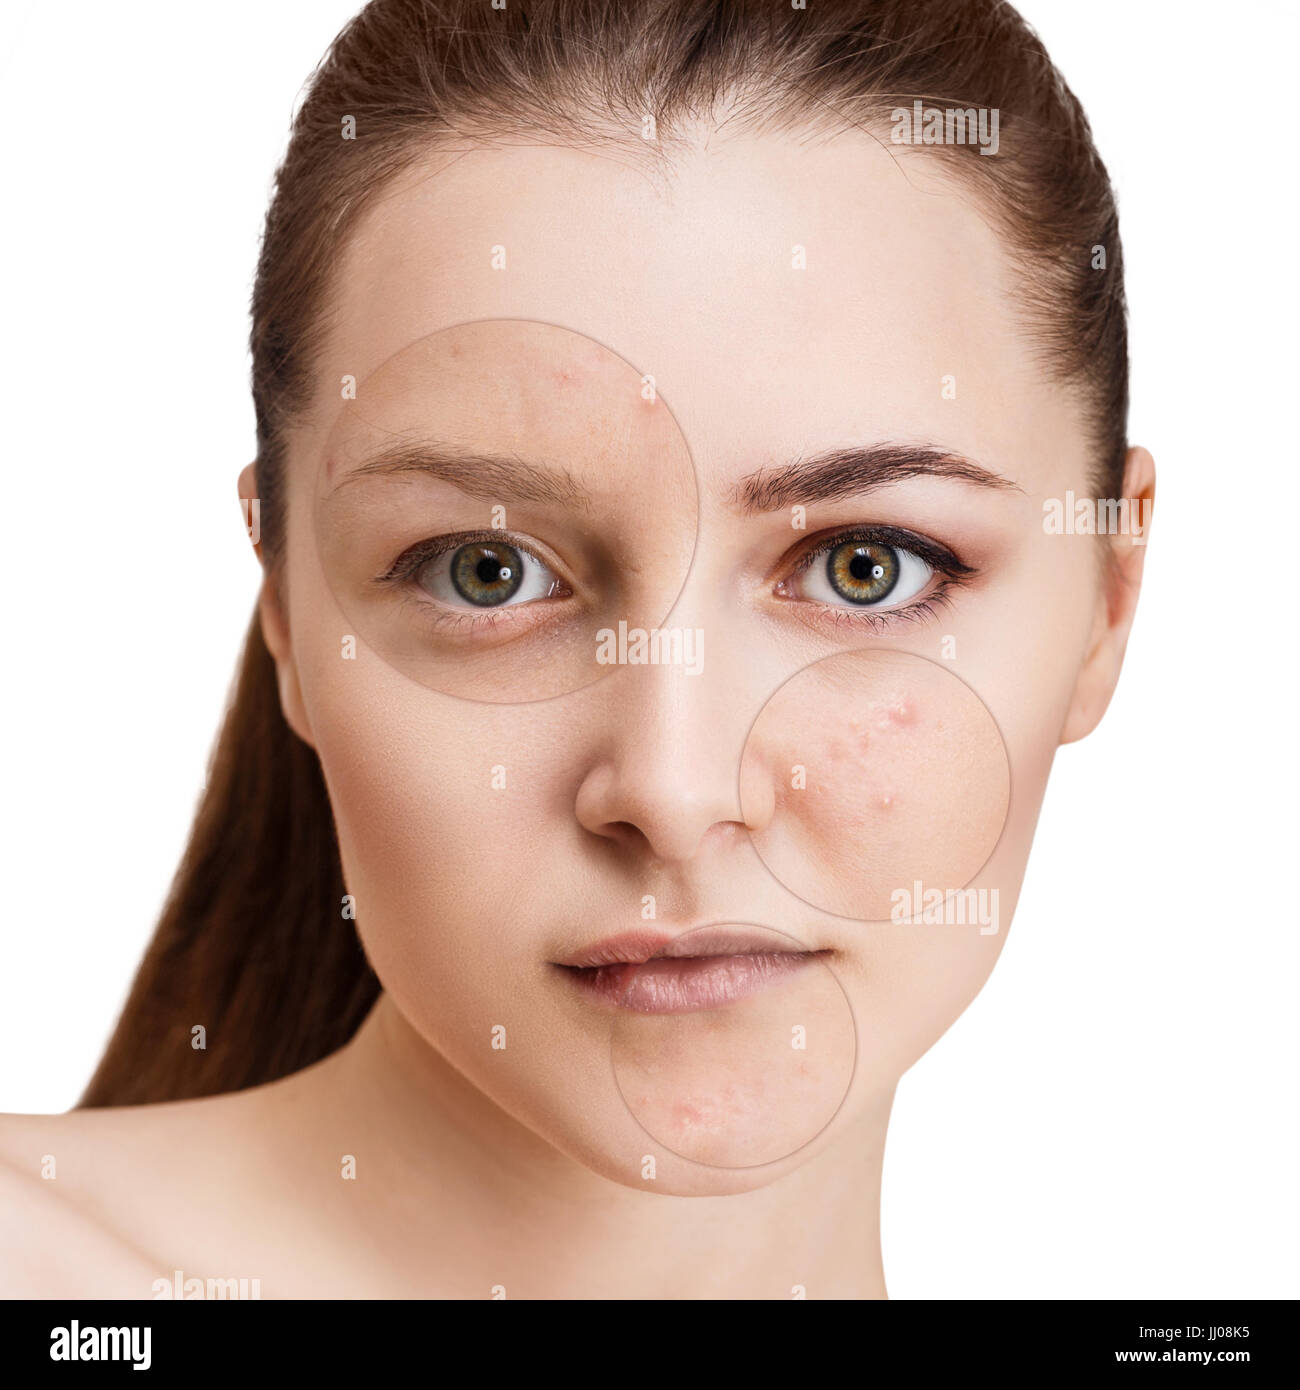 Circles shows problem skin of young girl Stock Photo